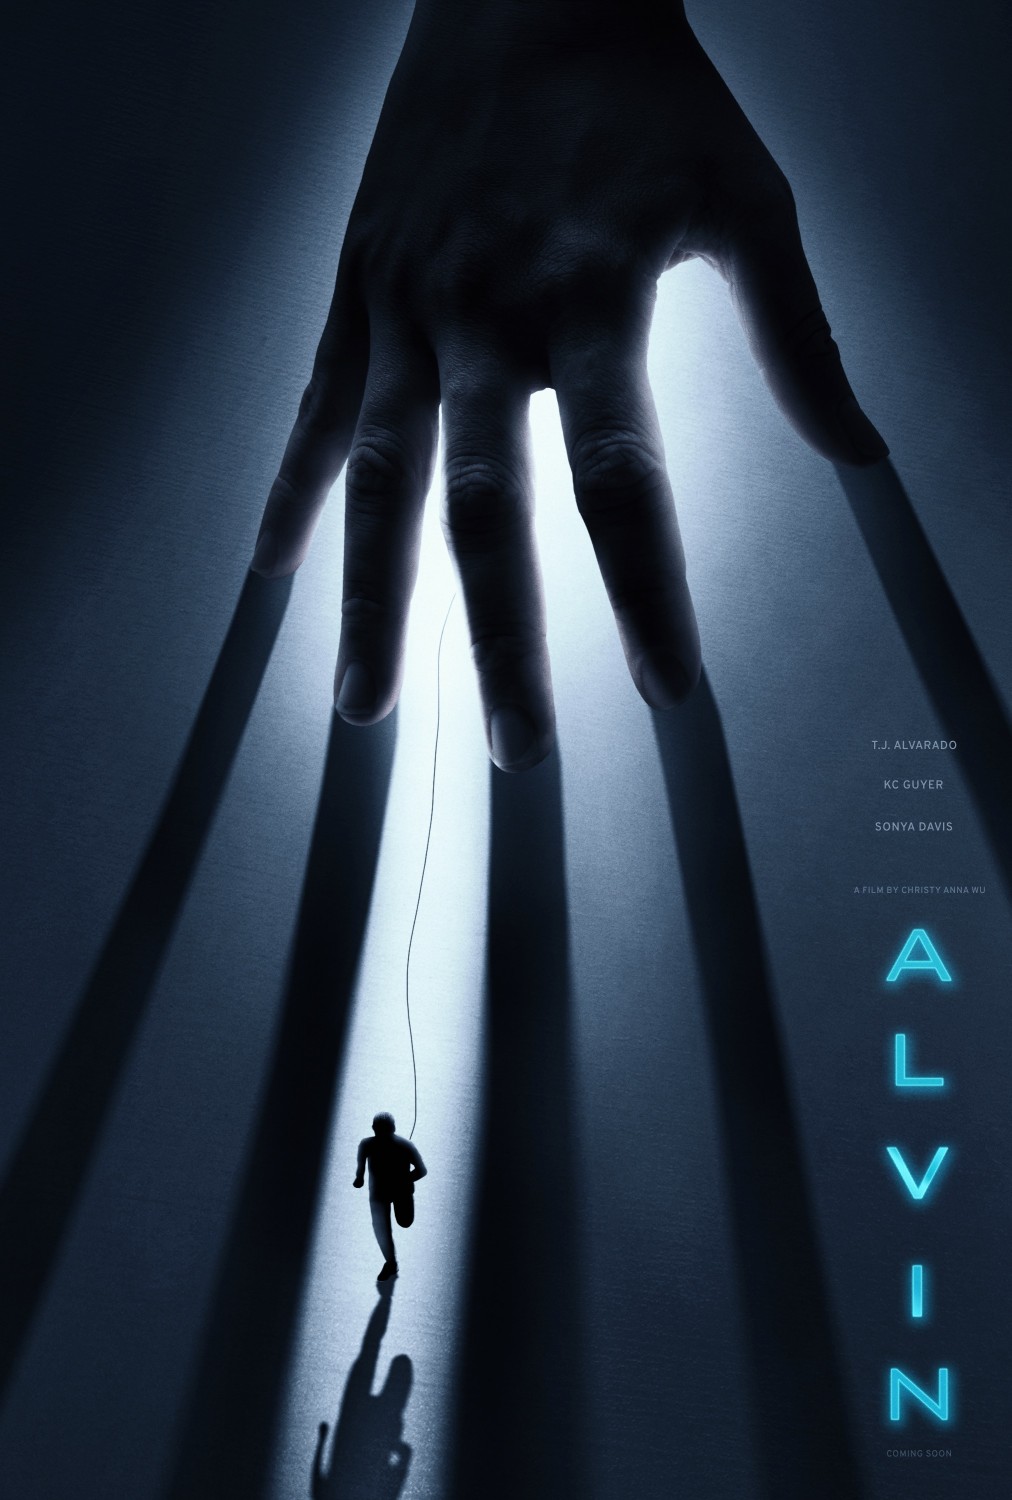 Extra Large Movie Poster Image for Alvin